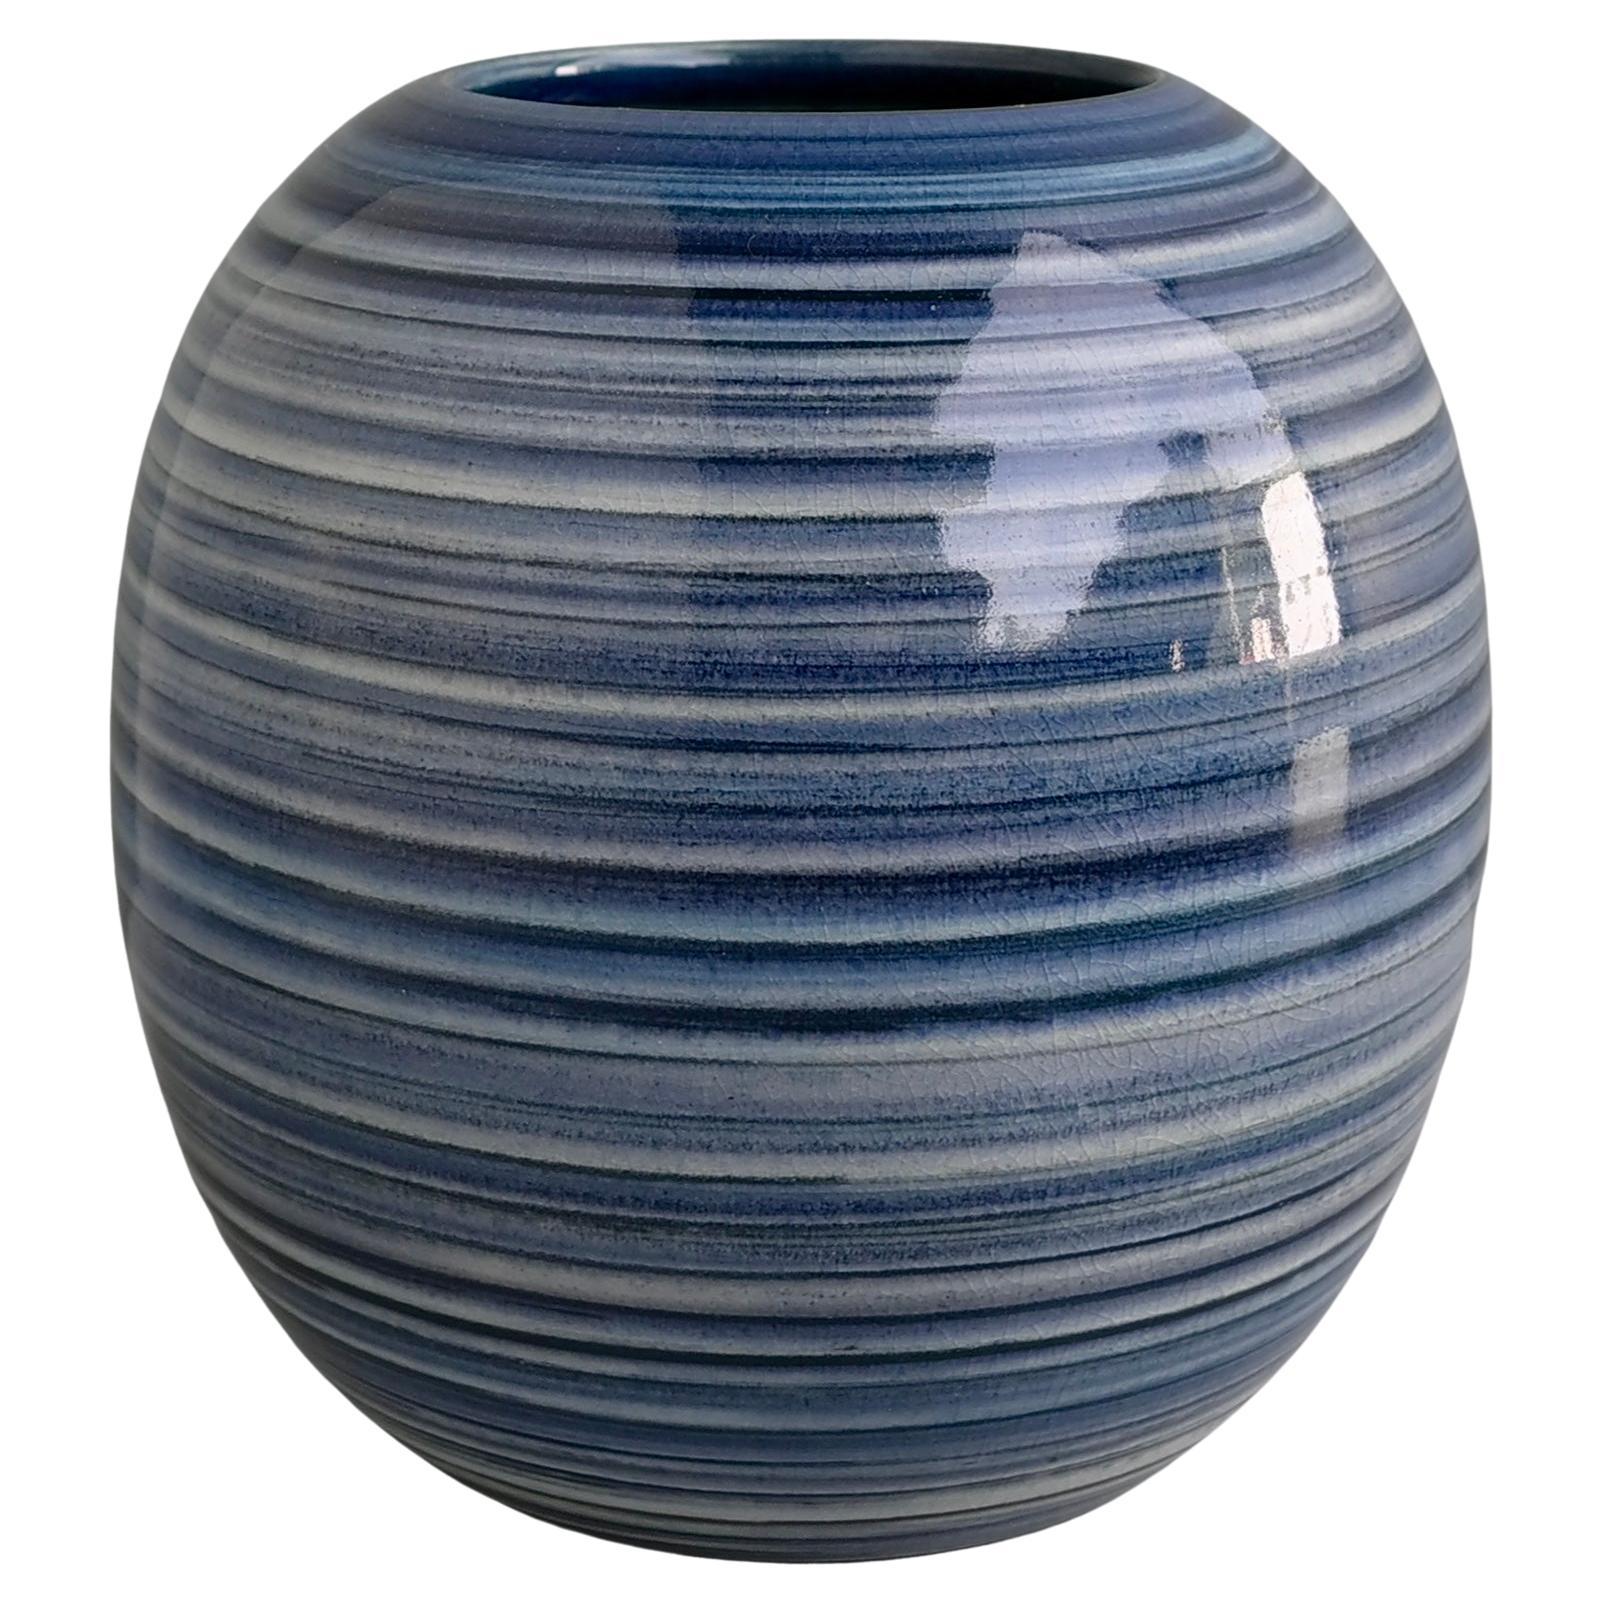 Blue Rainbow Vase by Mobach, The Netherlands 1960's